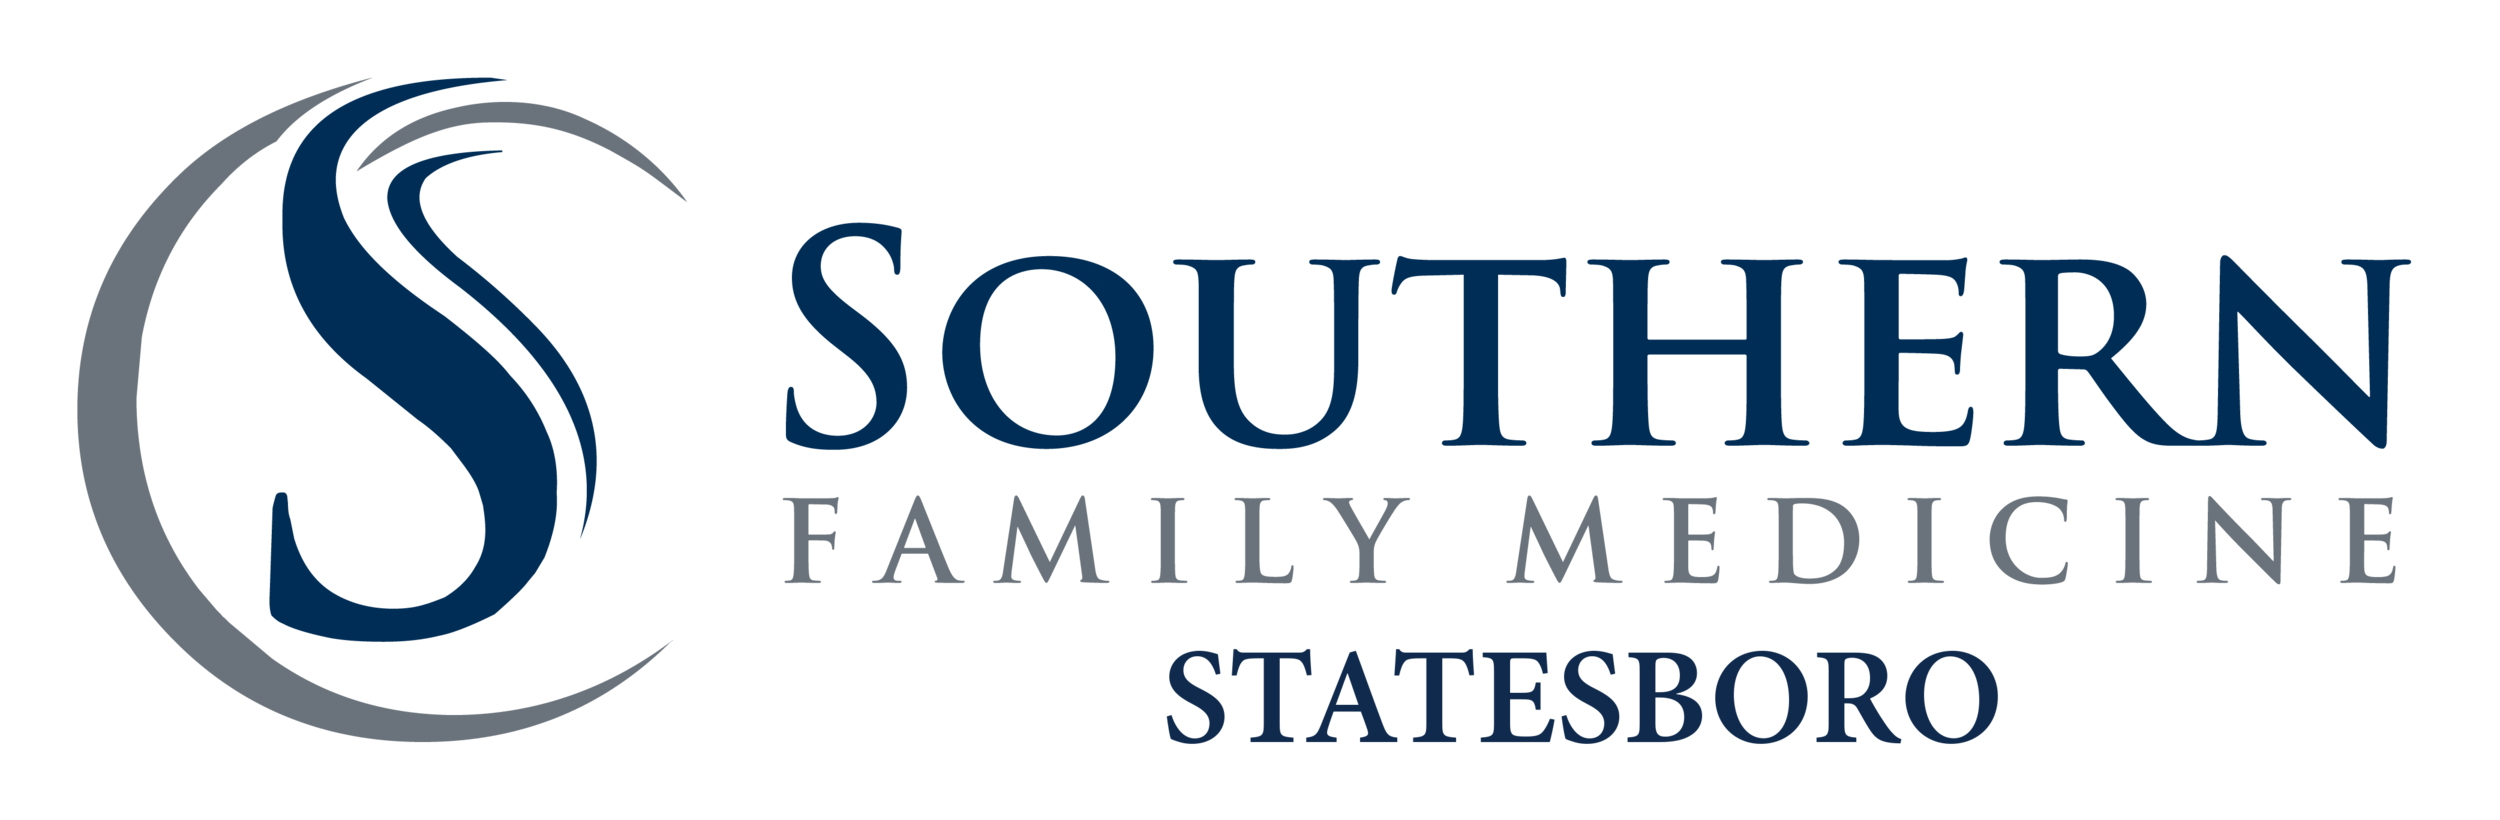 Southern Family Medicine